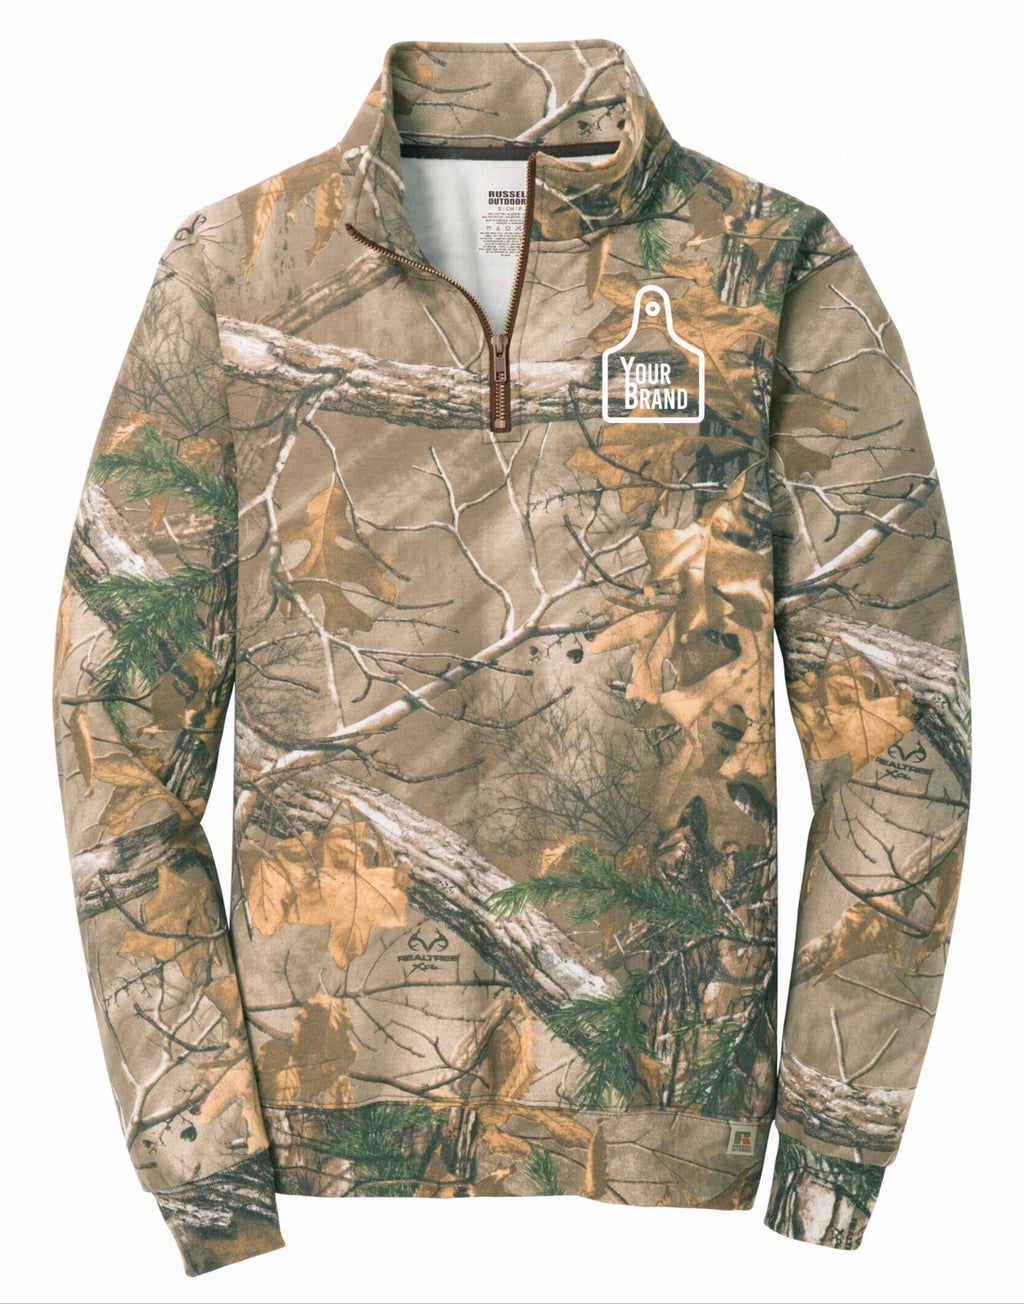 Cow Tag Russell Outdoors Camo 1/4 Zip